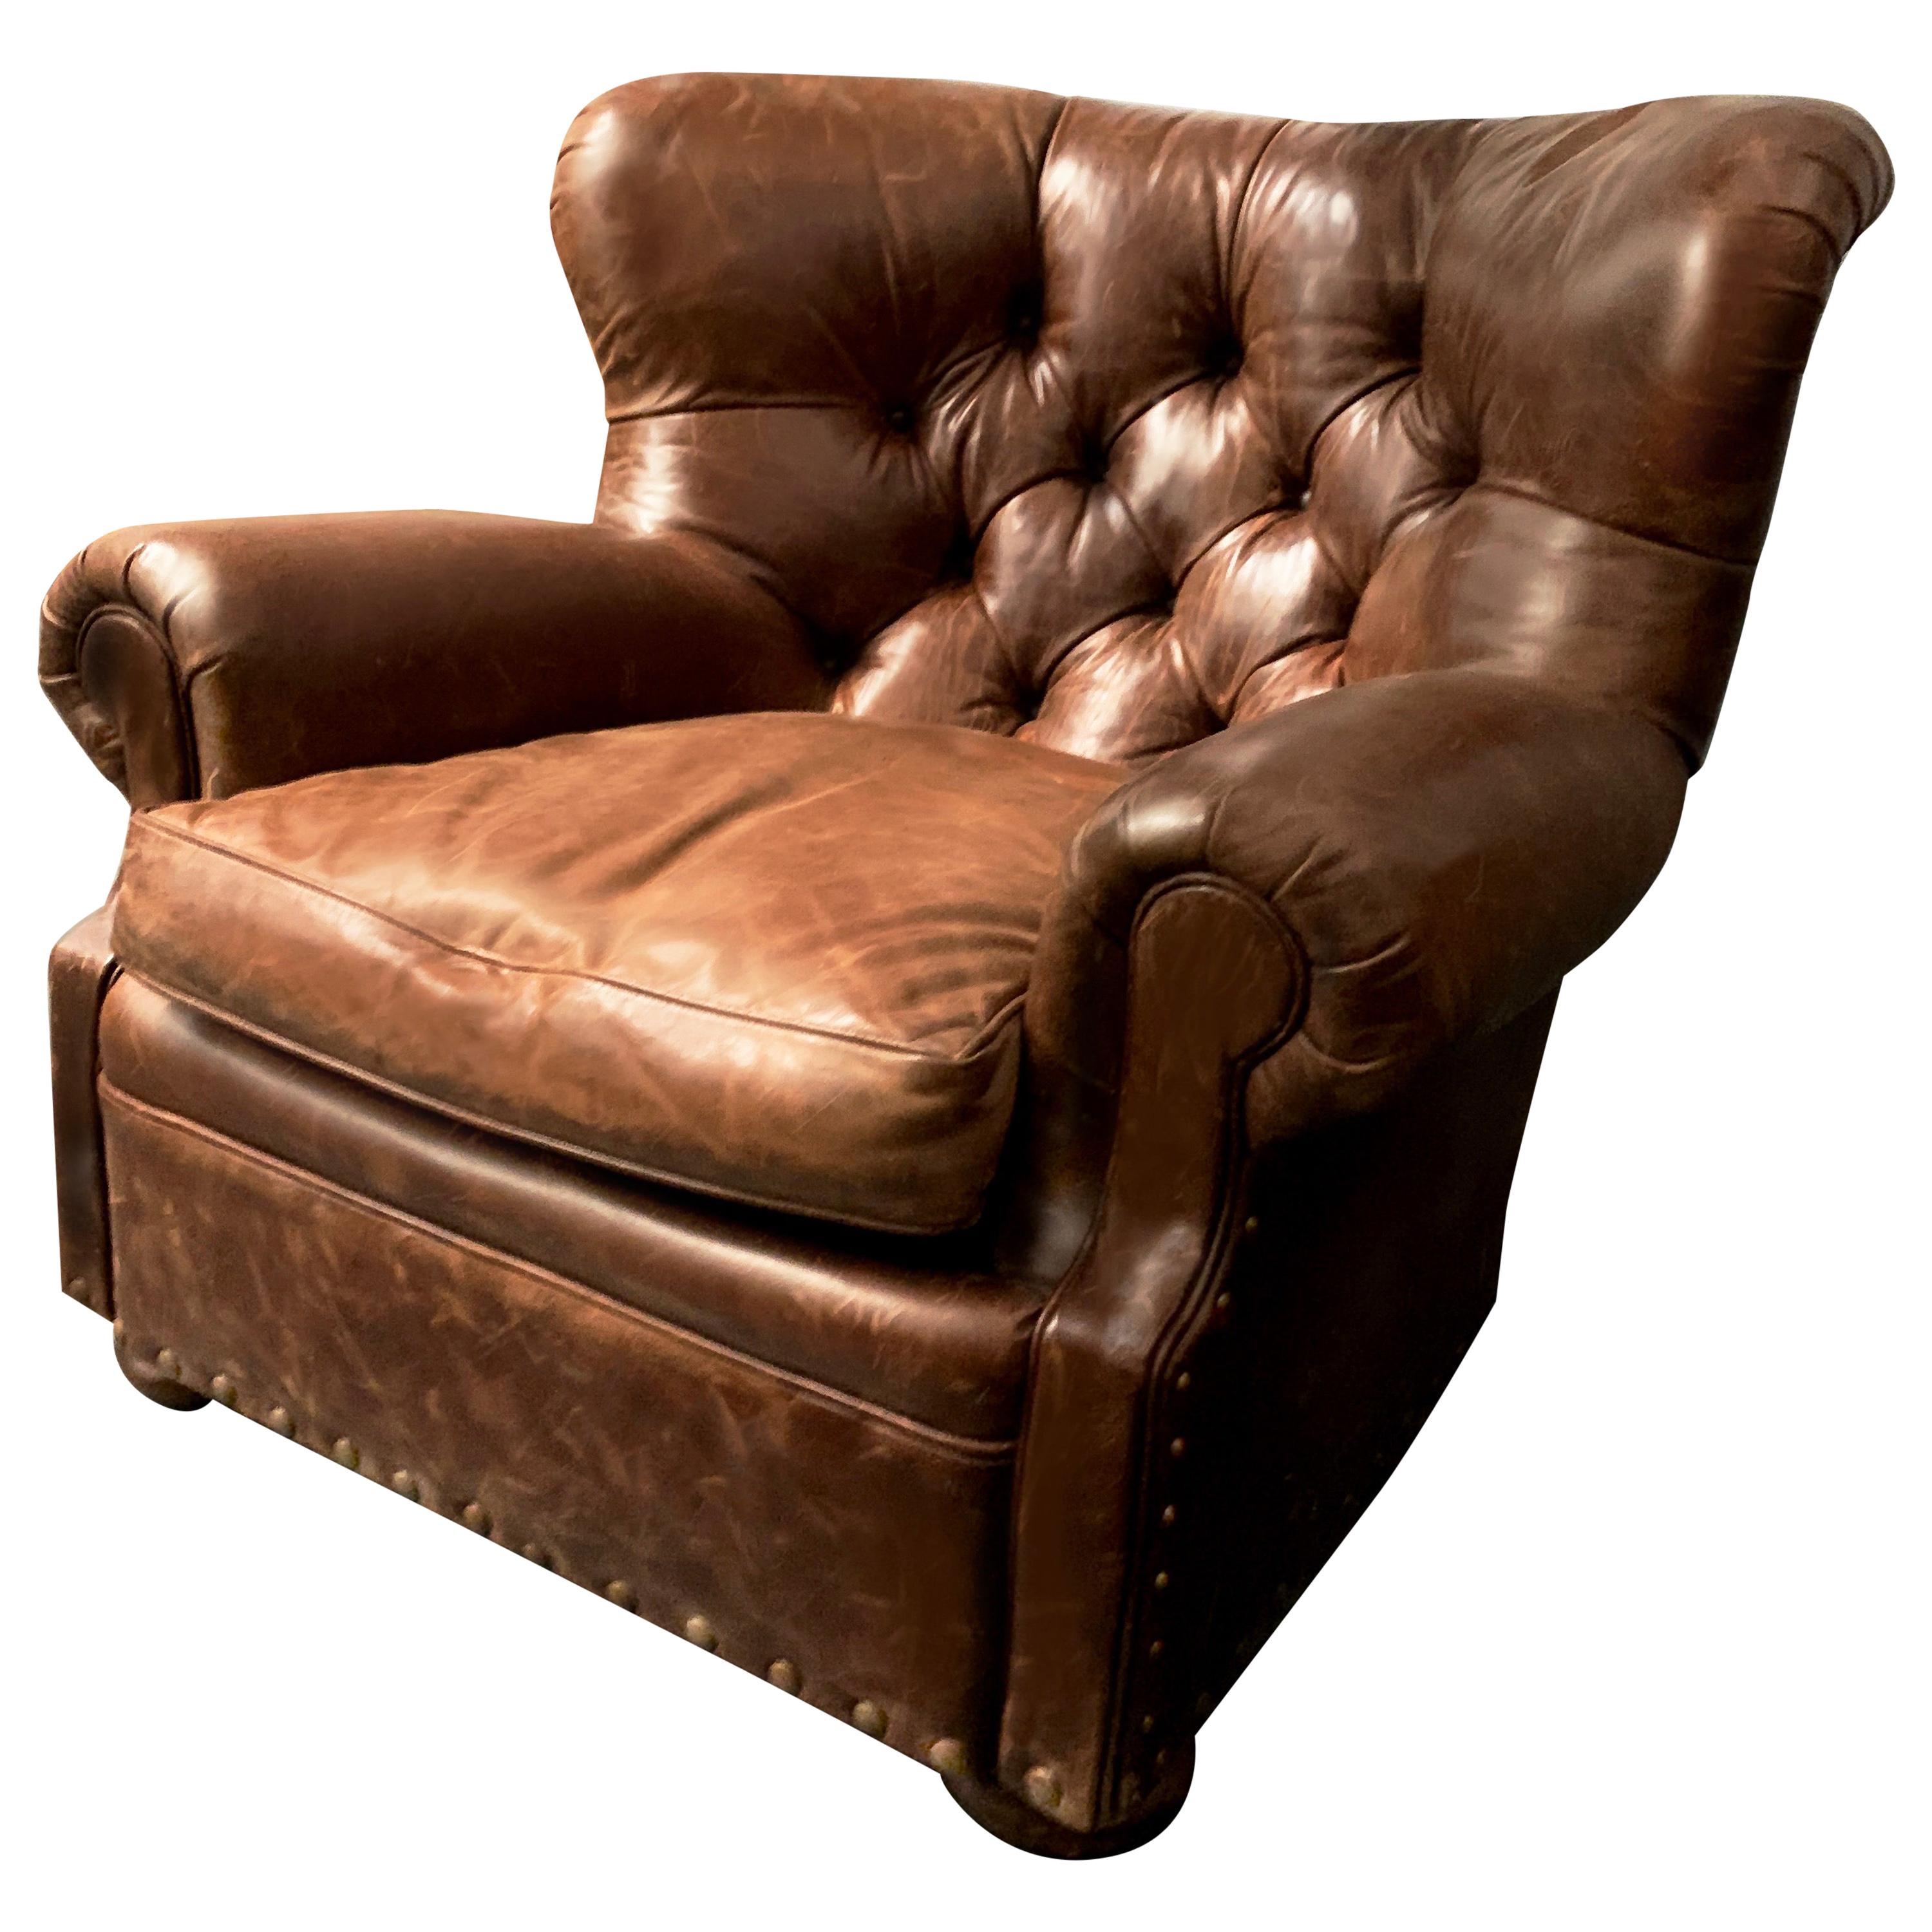 Henredon Vintage Brown Leather Writer's Armchair, Iconic Lounge